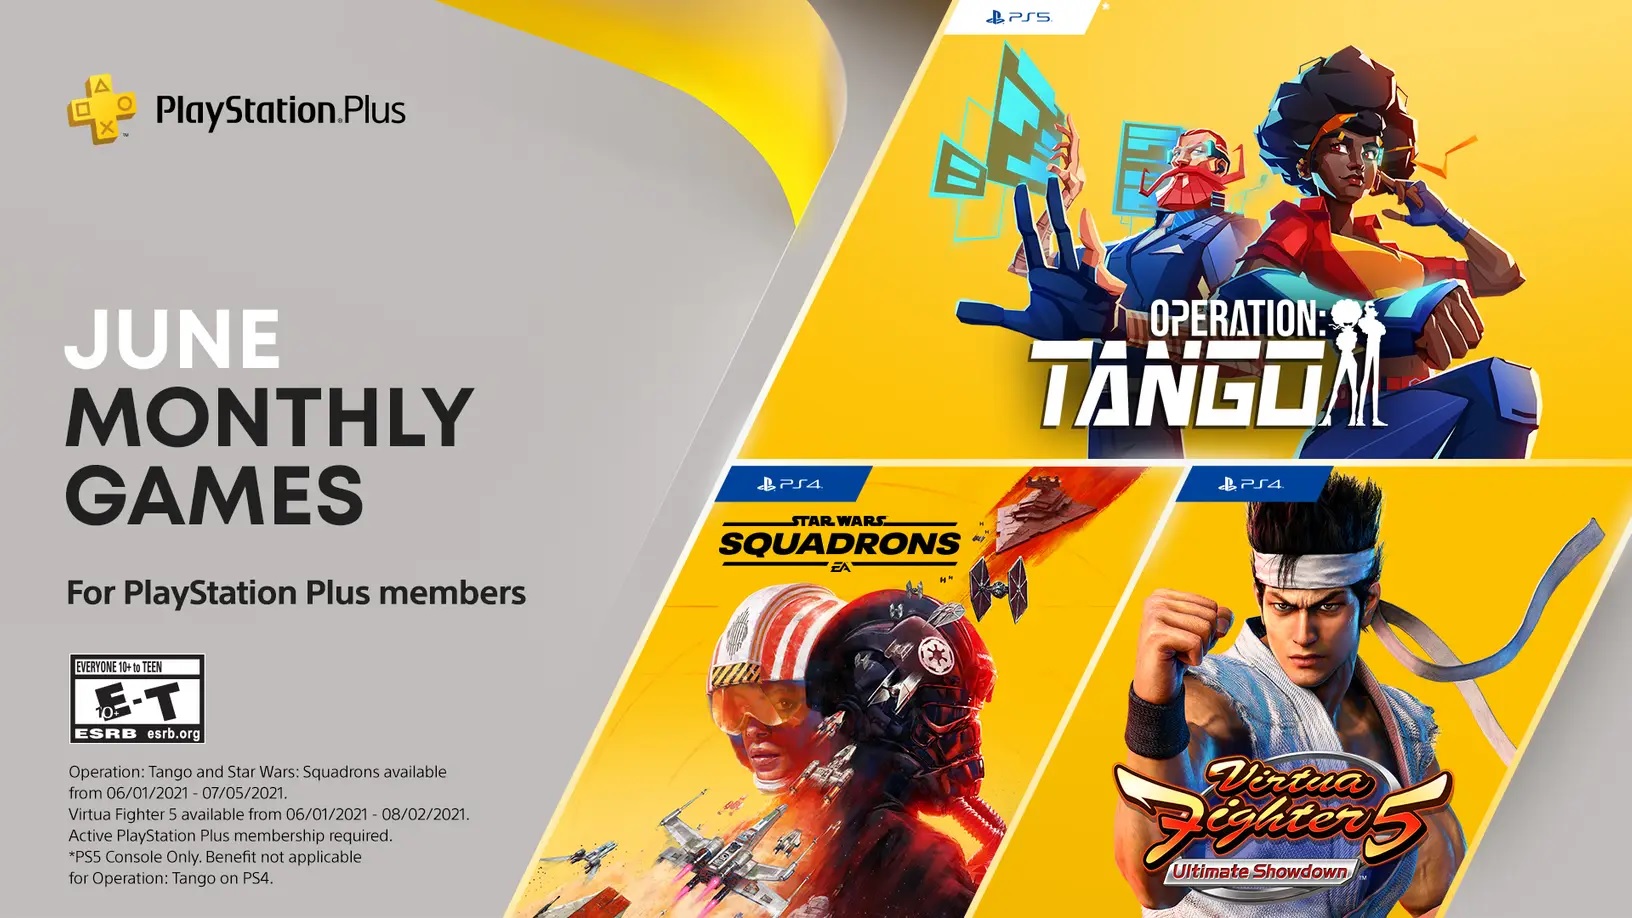 PlayStation Plus Lineup for June 2021